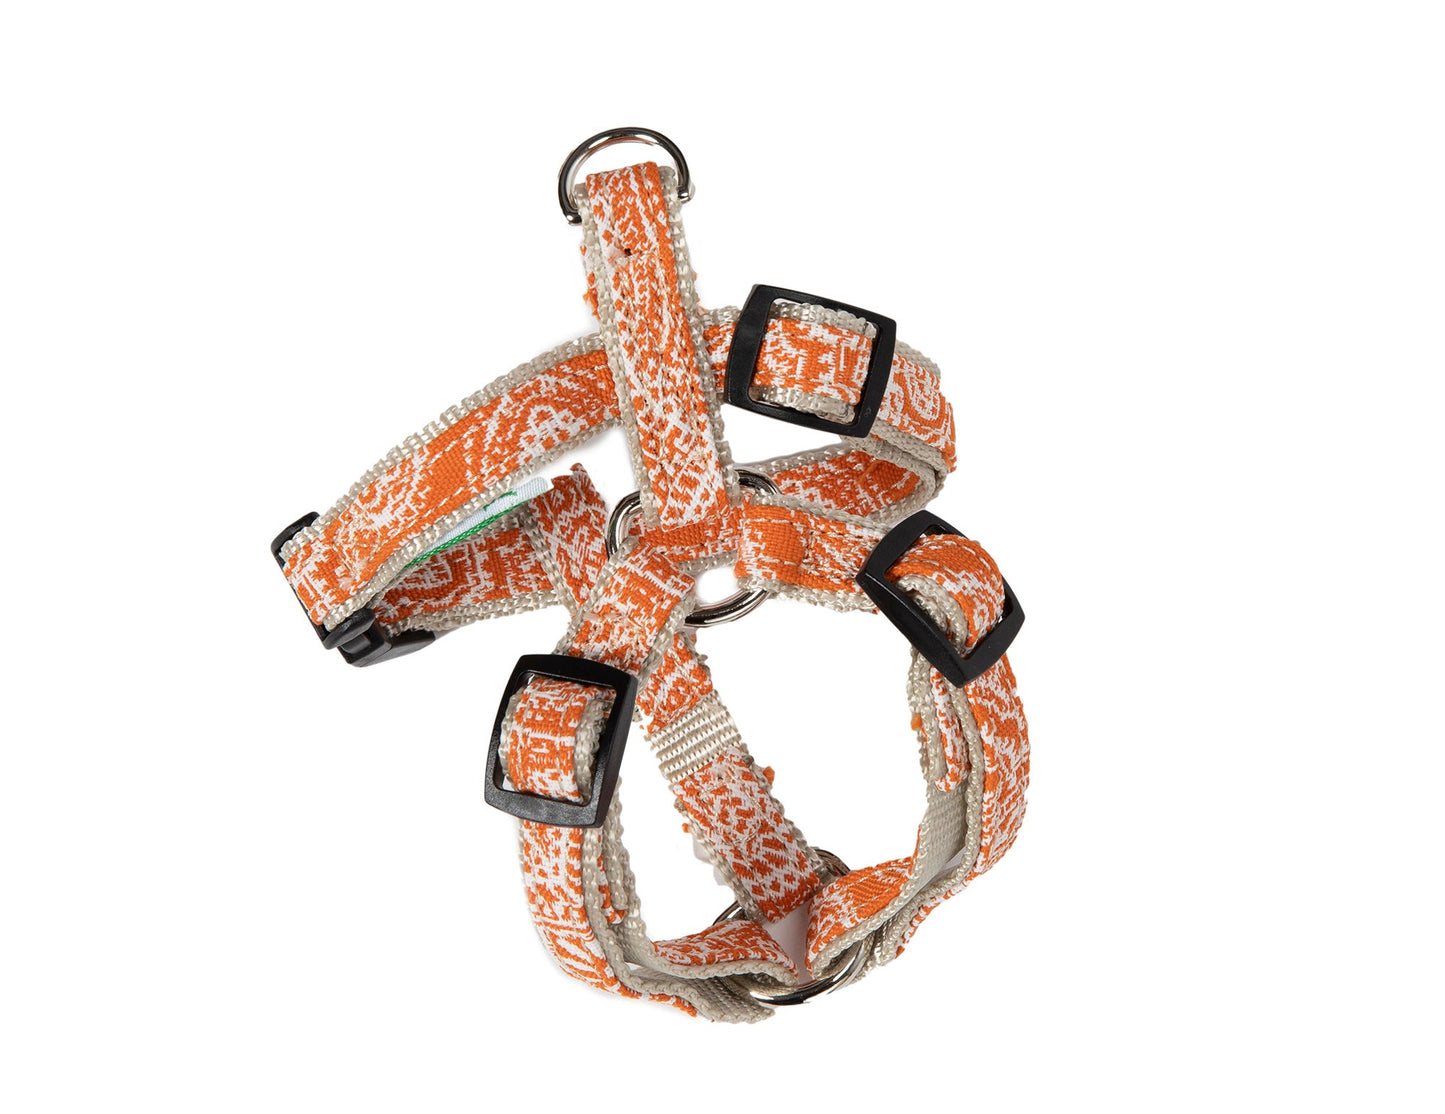 Canine Styles Designer Harnesses - 4 Color options